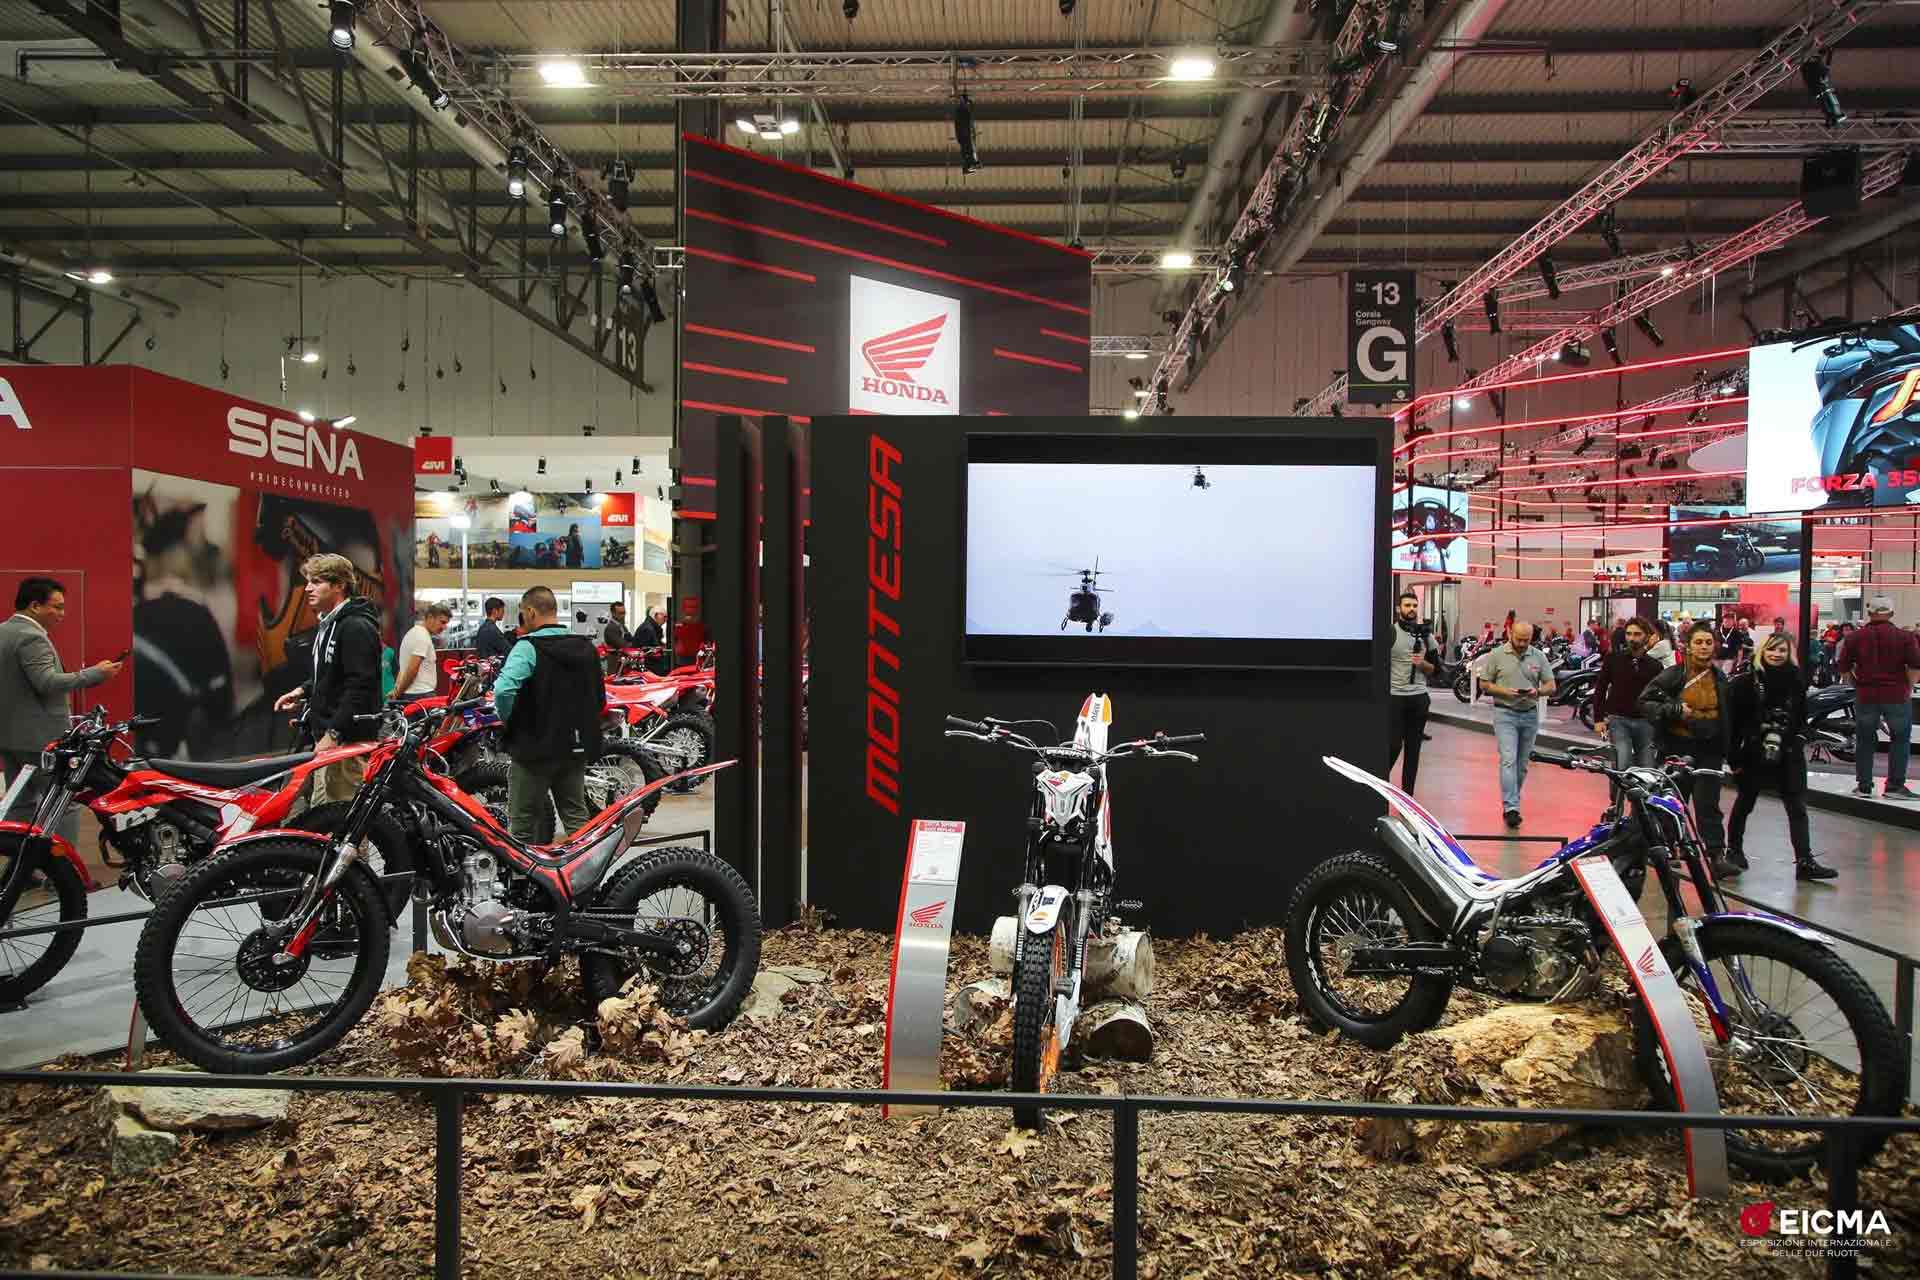 Using your imagination is for suckers. Honda trials motorcycles, in their “natural” environs.